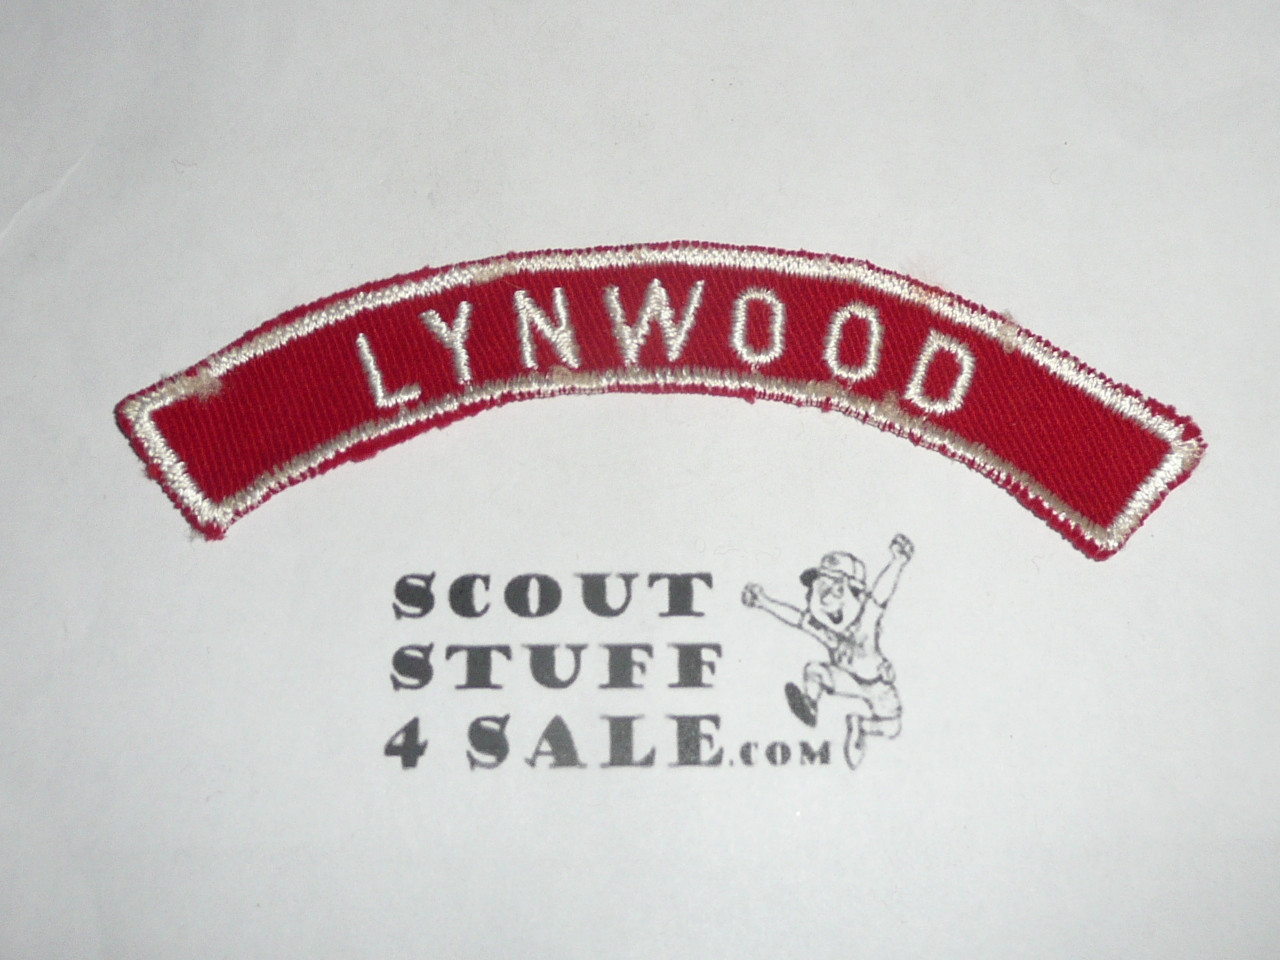 LYNNWOOD Red and White Community Strip, sewn